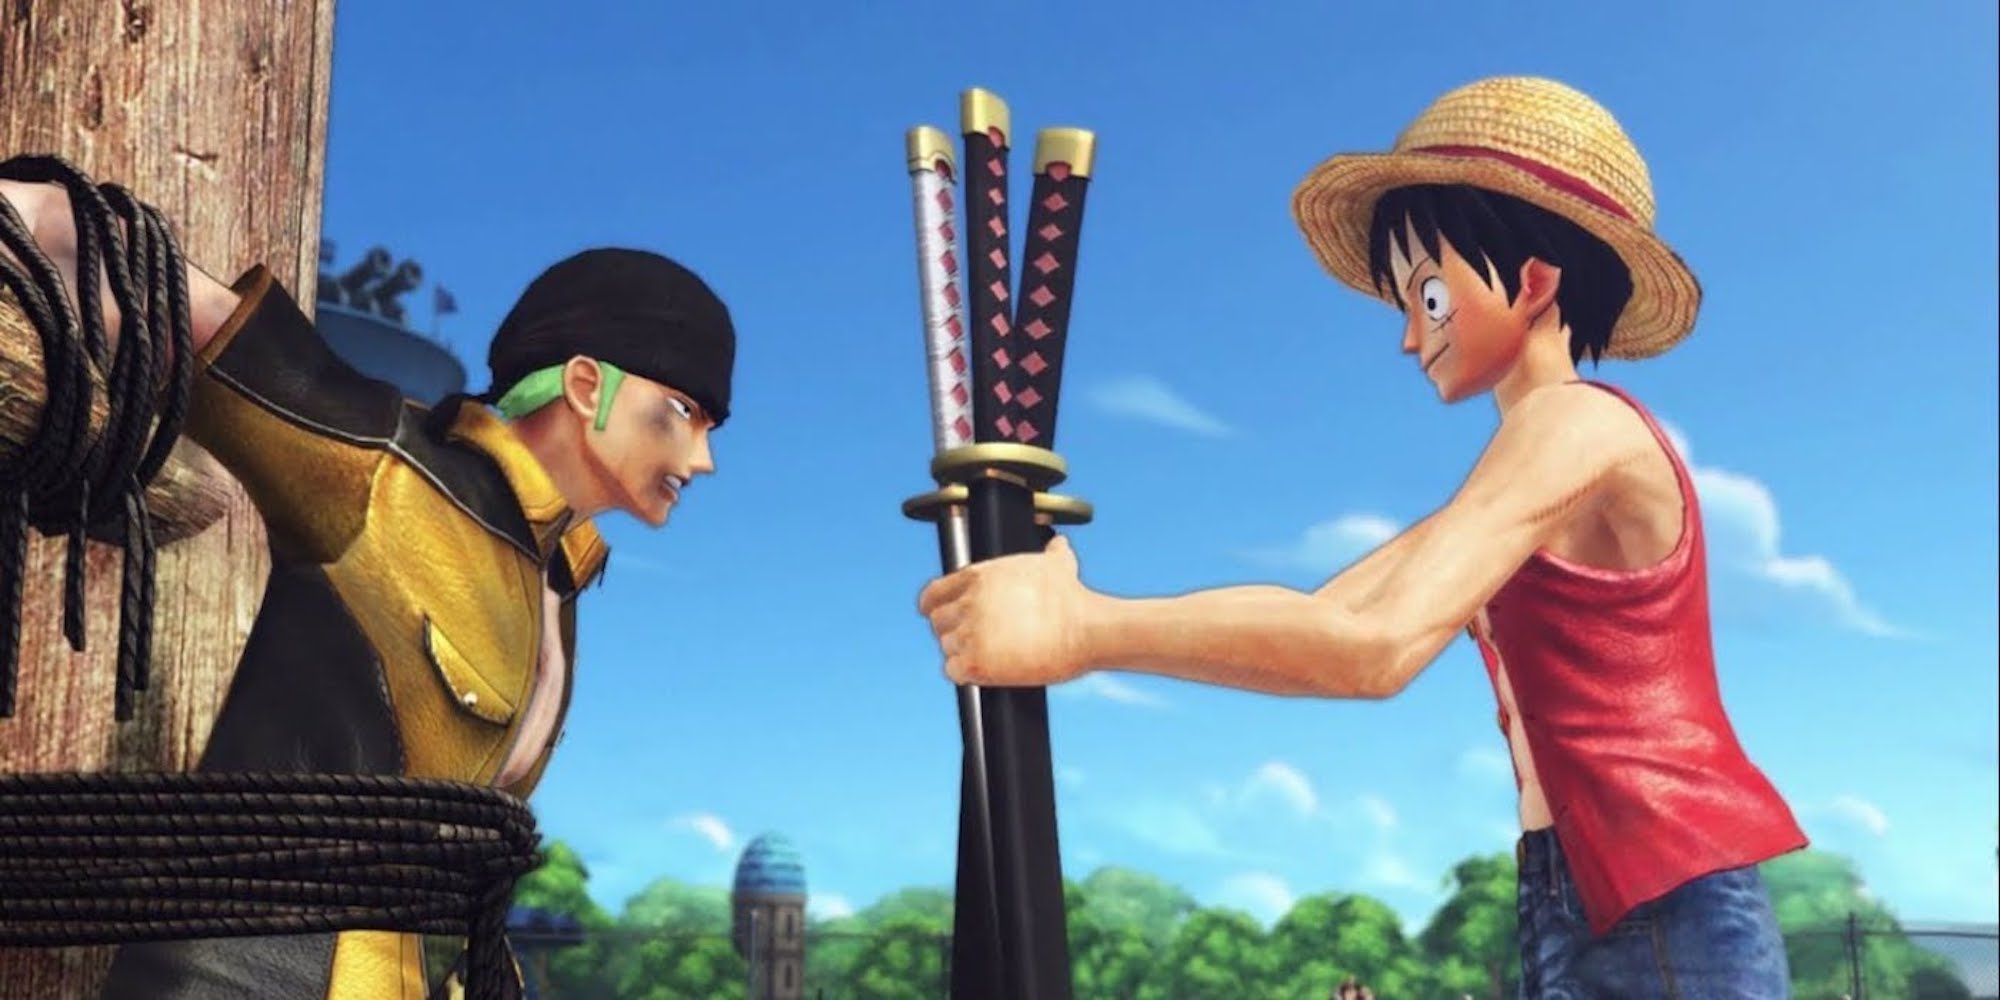 Zoro and Luffy from One Piece: Pirate Warriors